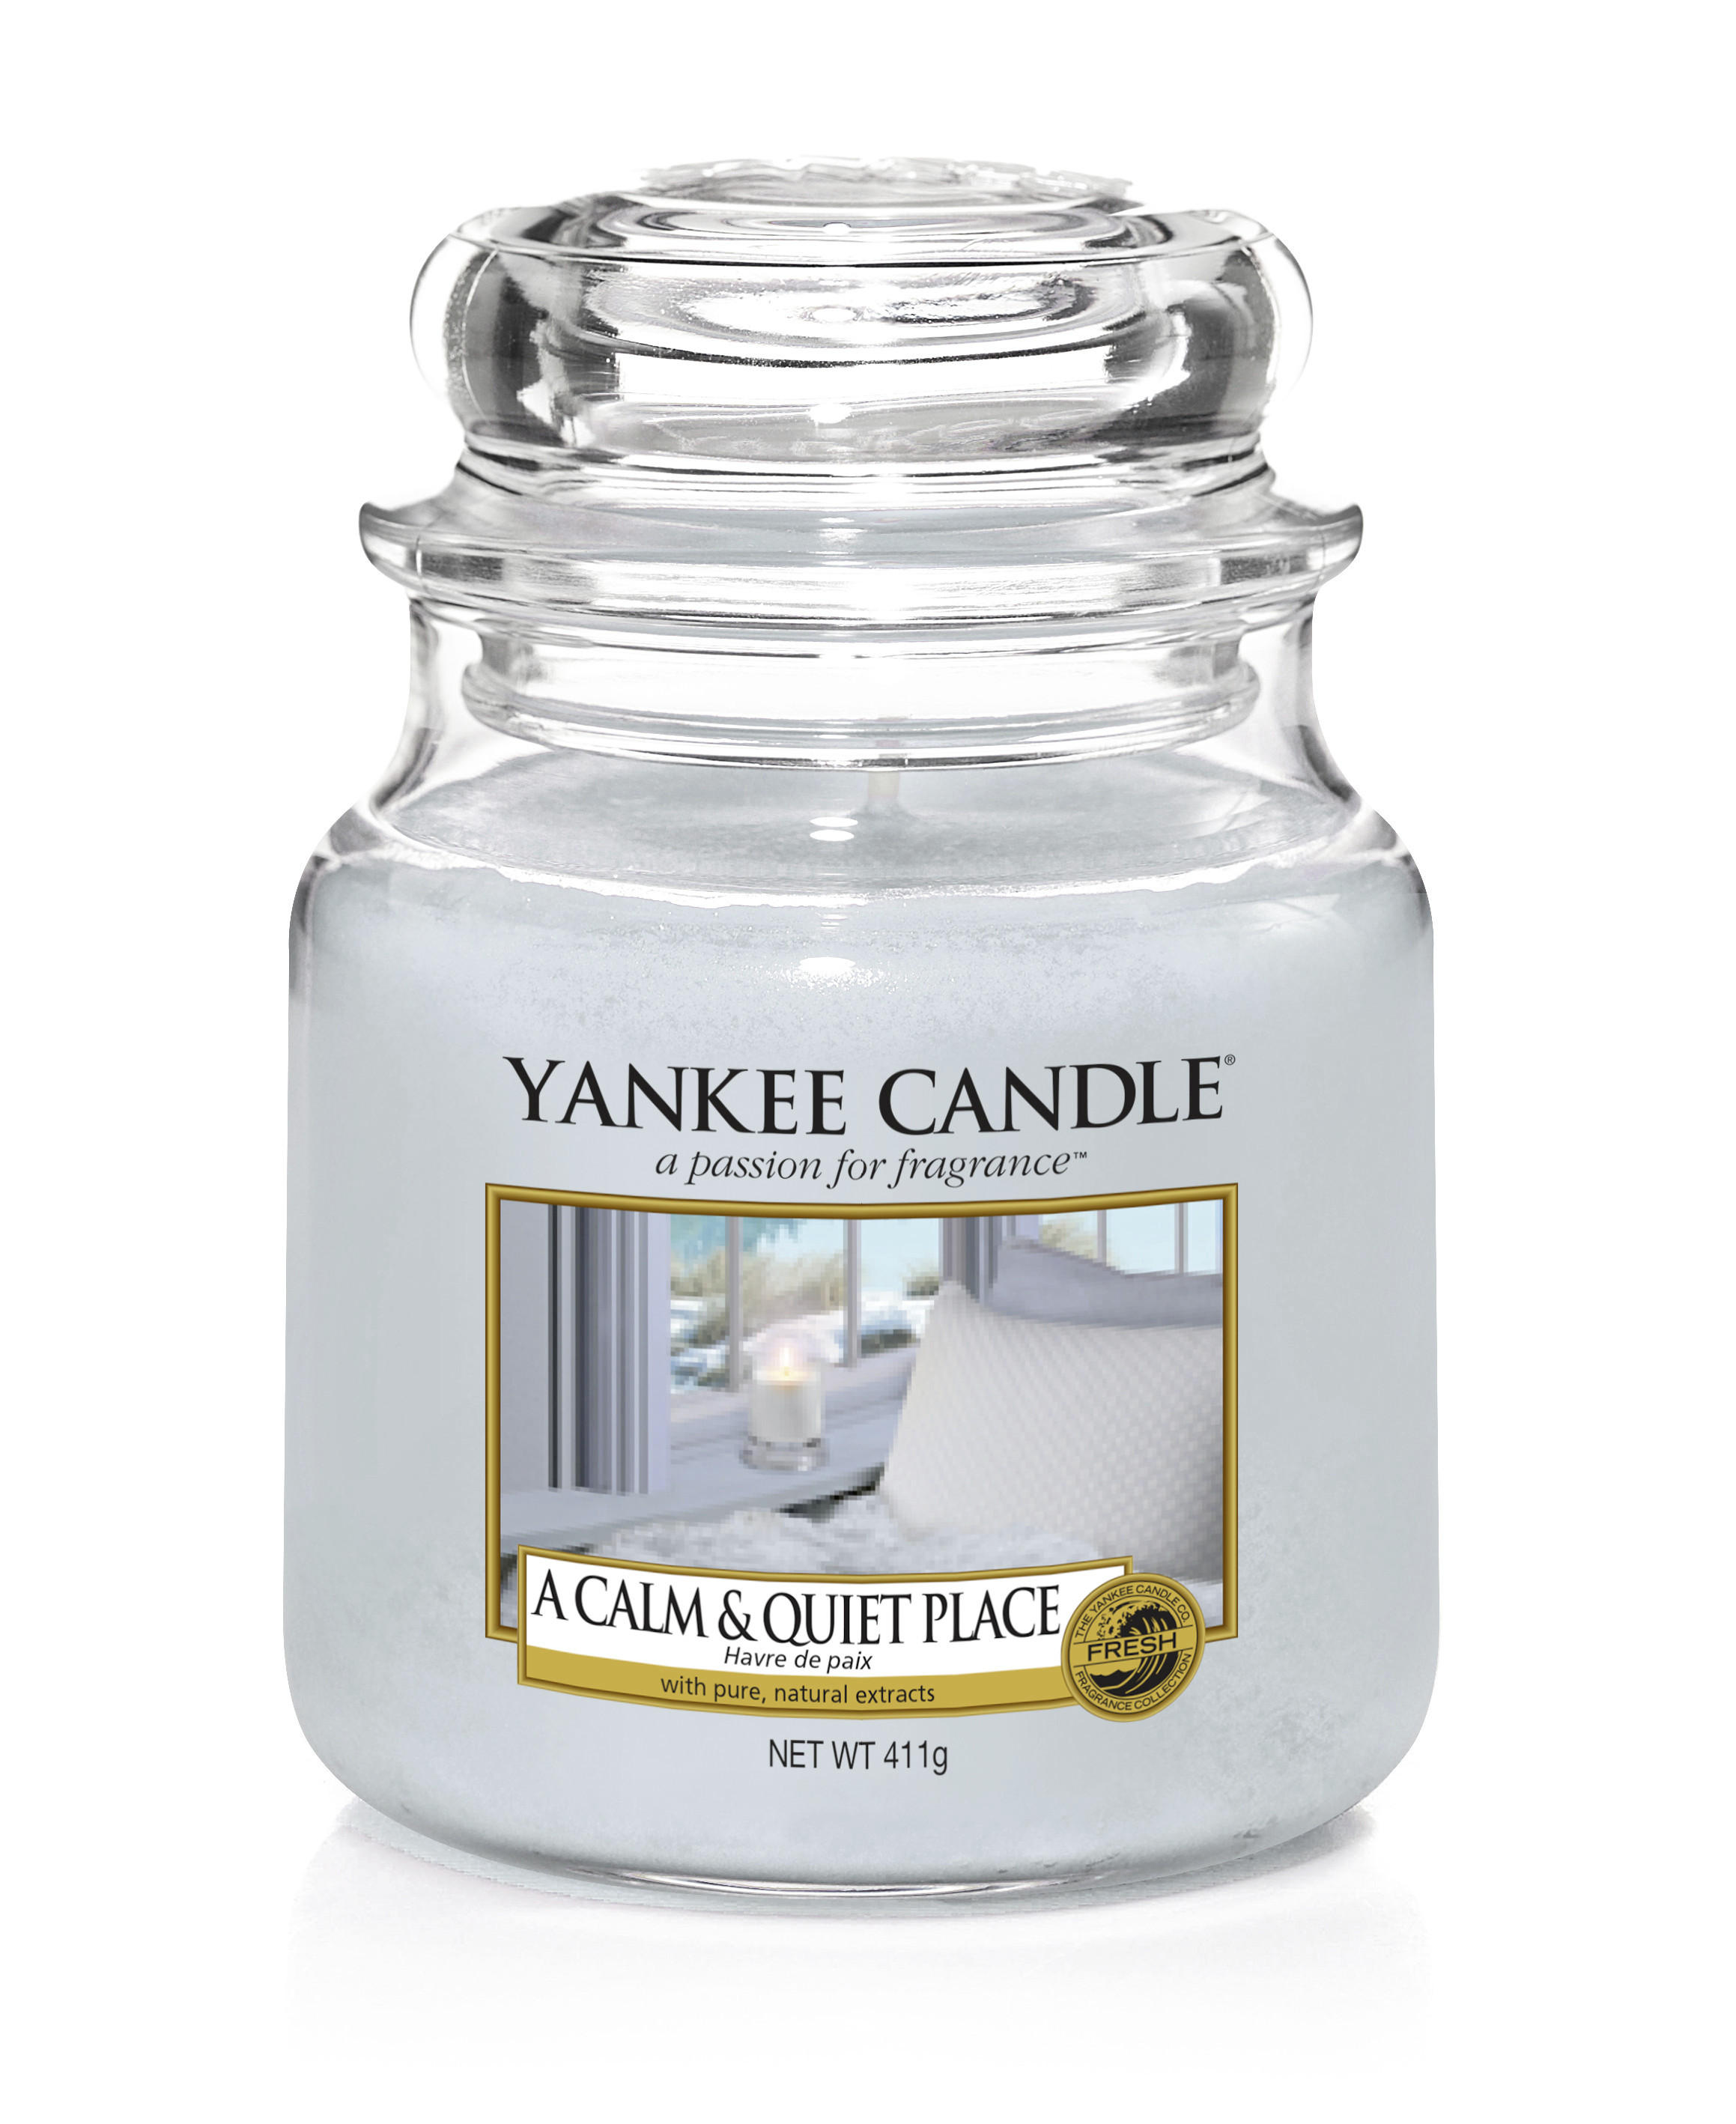 DUFTKERZE Yankee Candle A Clam & Quiet Place  - Transparent/Hellblau, KONVENTIONELL, Glas (9,7/13,5cm) - Yankee Candle